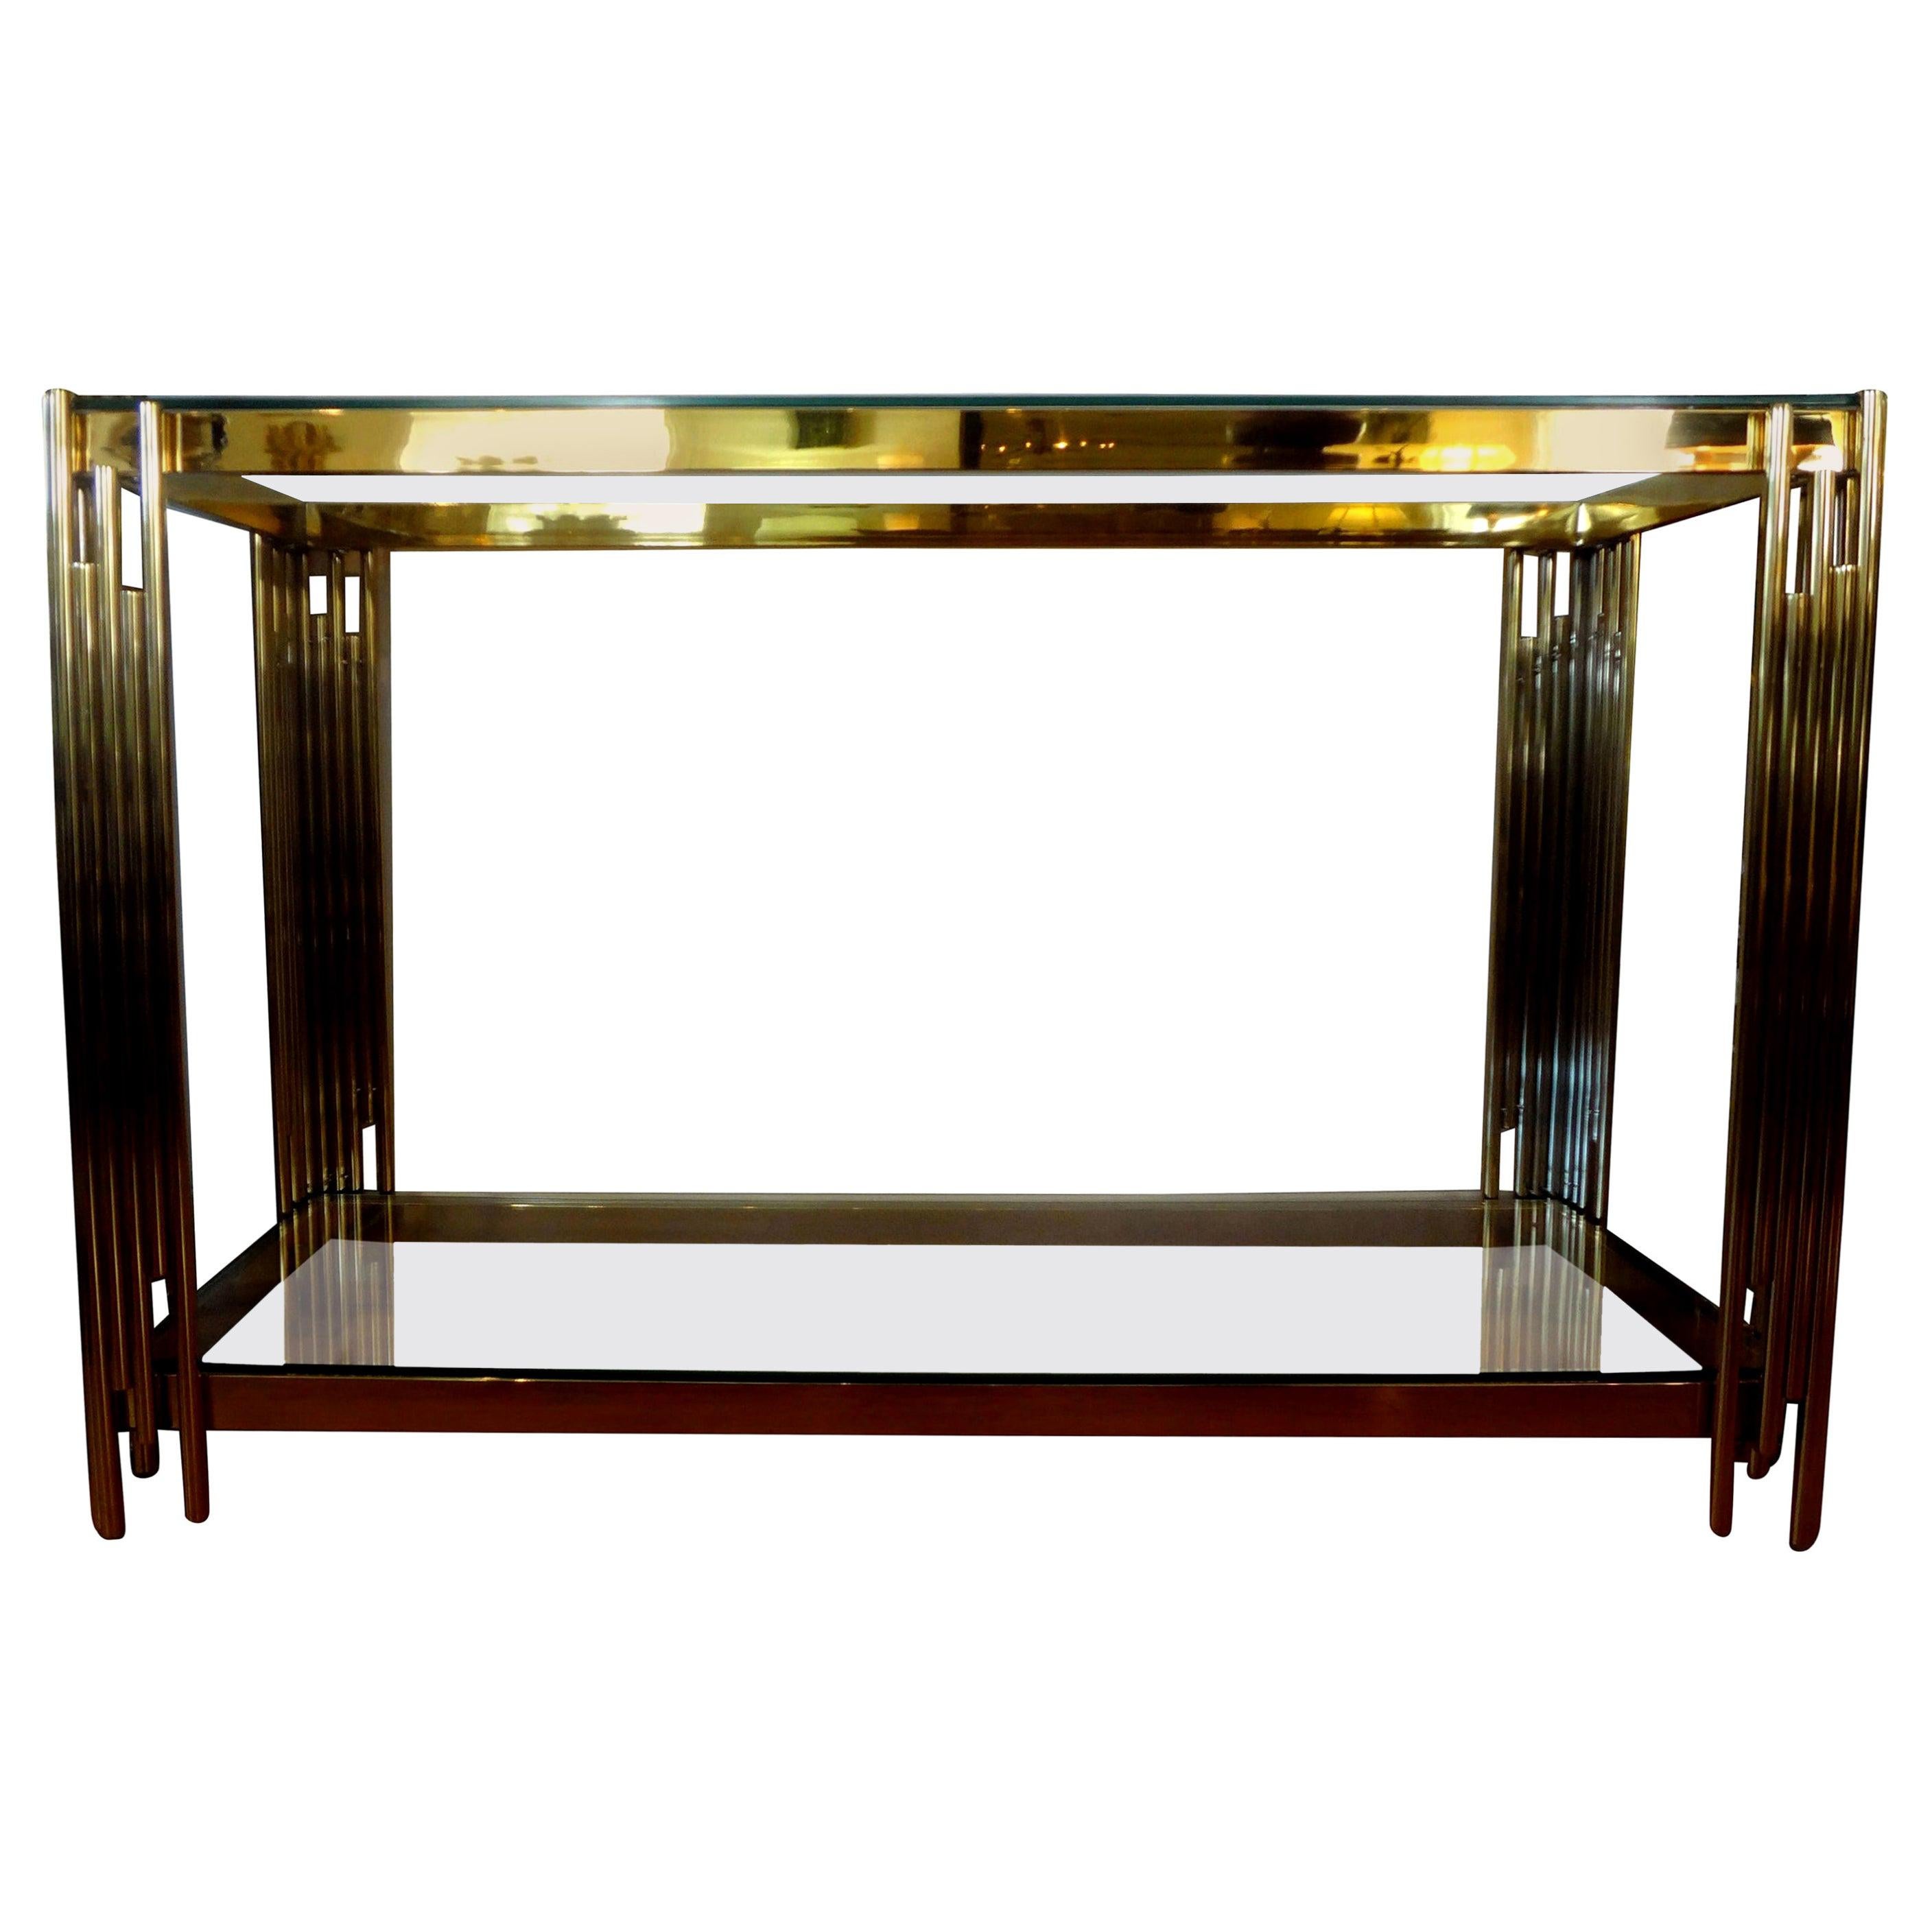 Stunning Italian modern brass two-tiered console table with glass tops. This fabulous Italian midcentury Romeo Rega style free standing Italian made geometric modernist console table is in very good vintage condition and can be used as a sofa table